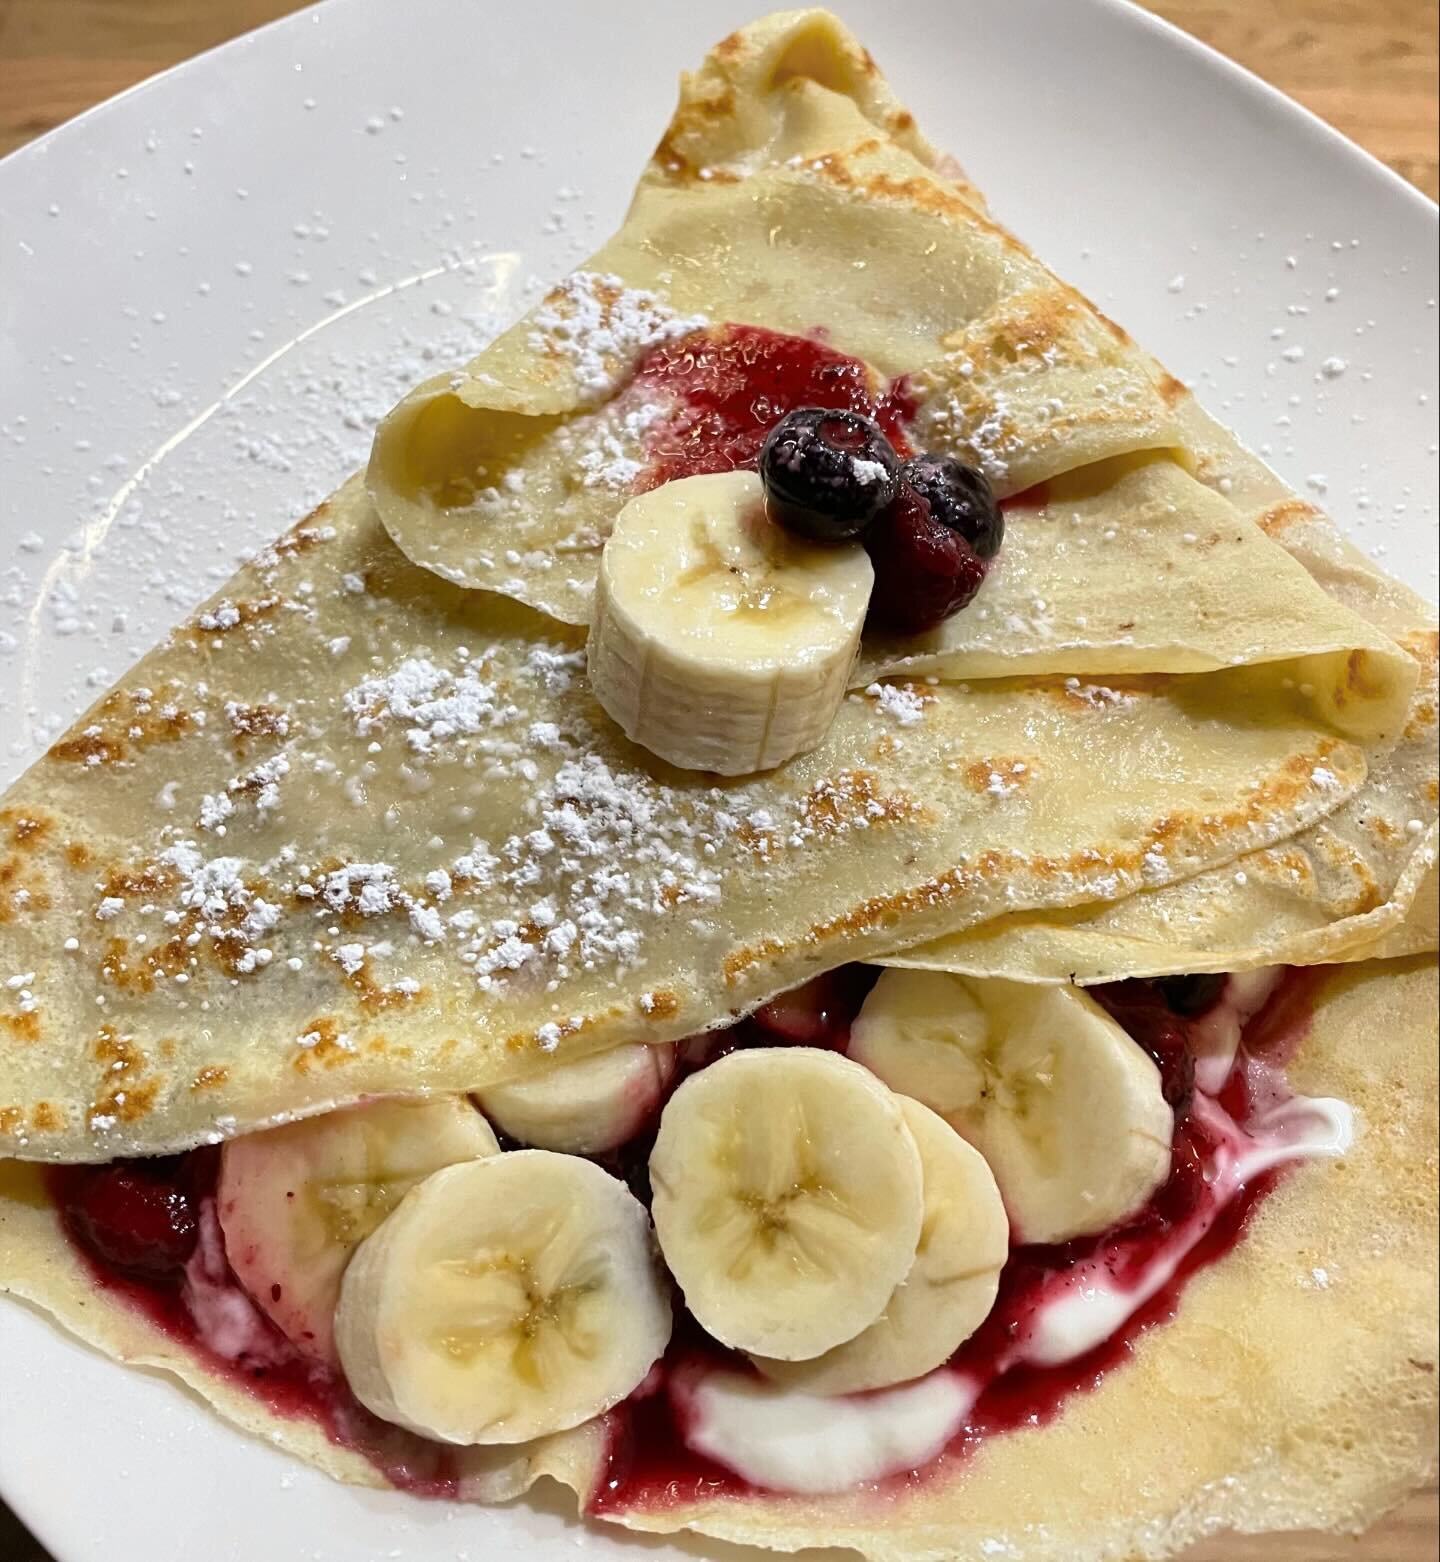 🍓🫐🍌 Fresh crepes are waiting for you here at Perk! 😋